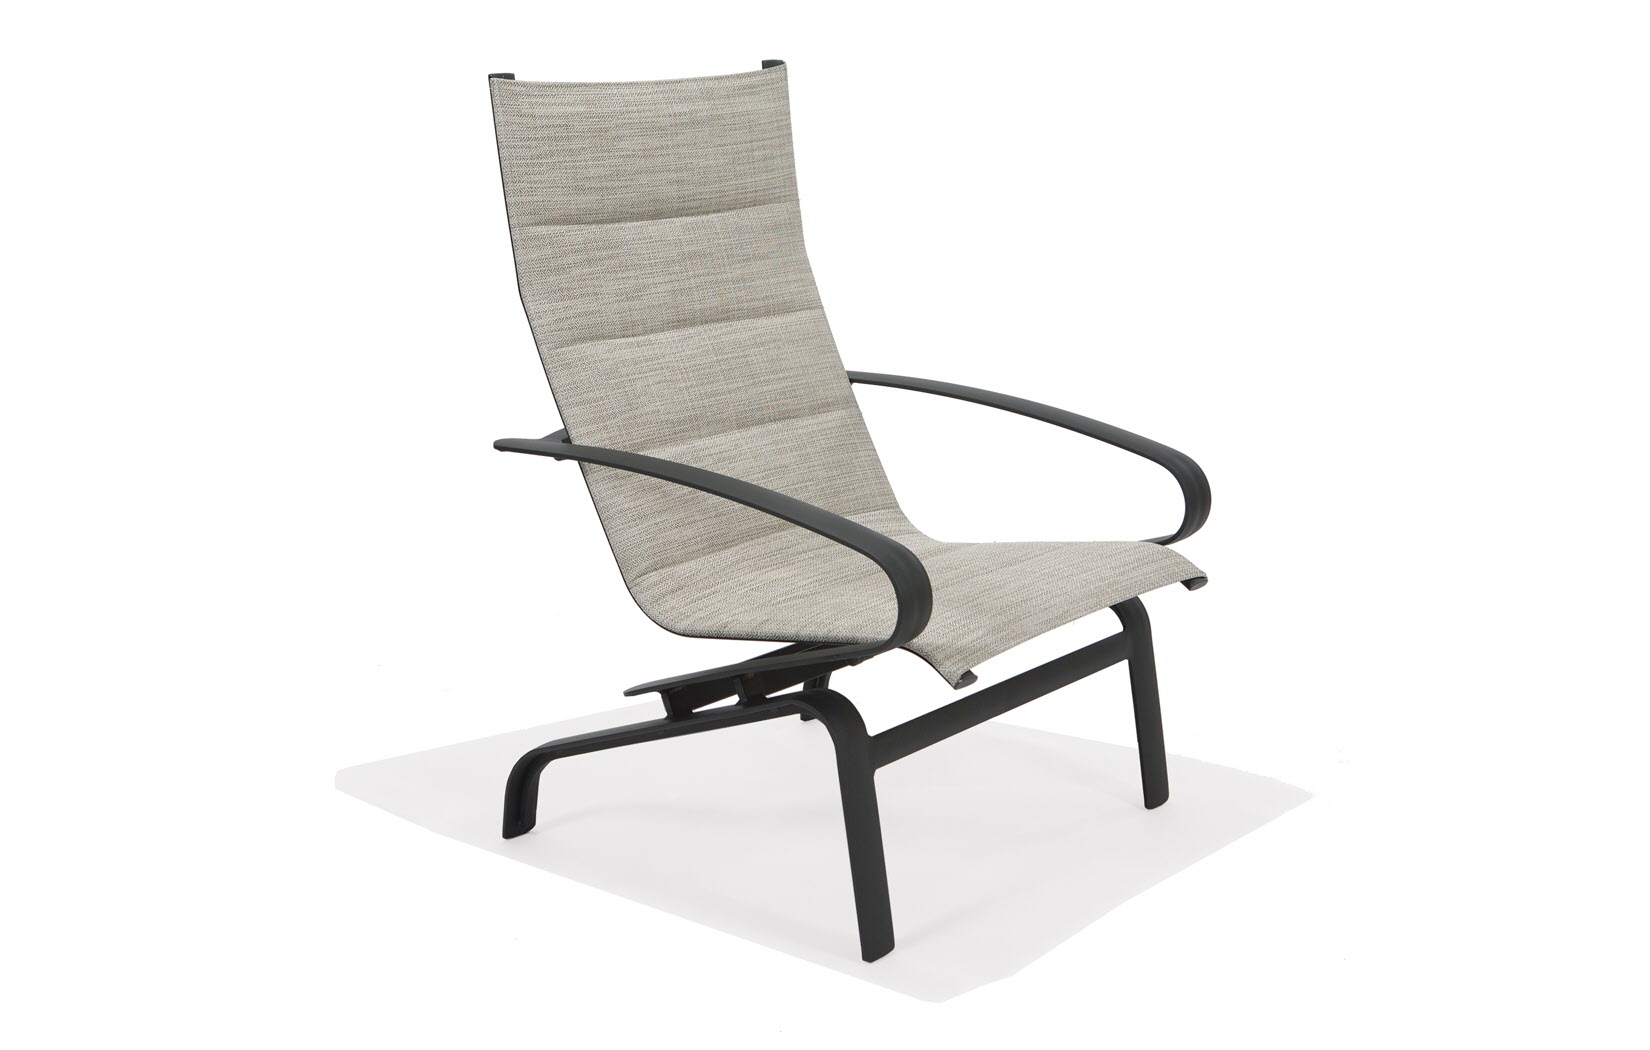 Edge Padded Sling Collection Chat Chair